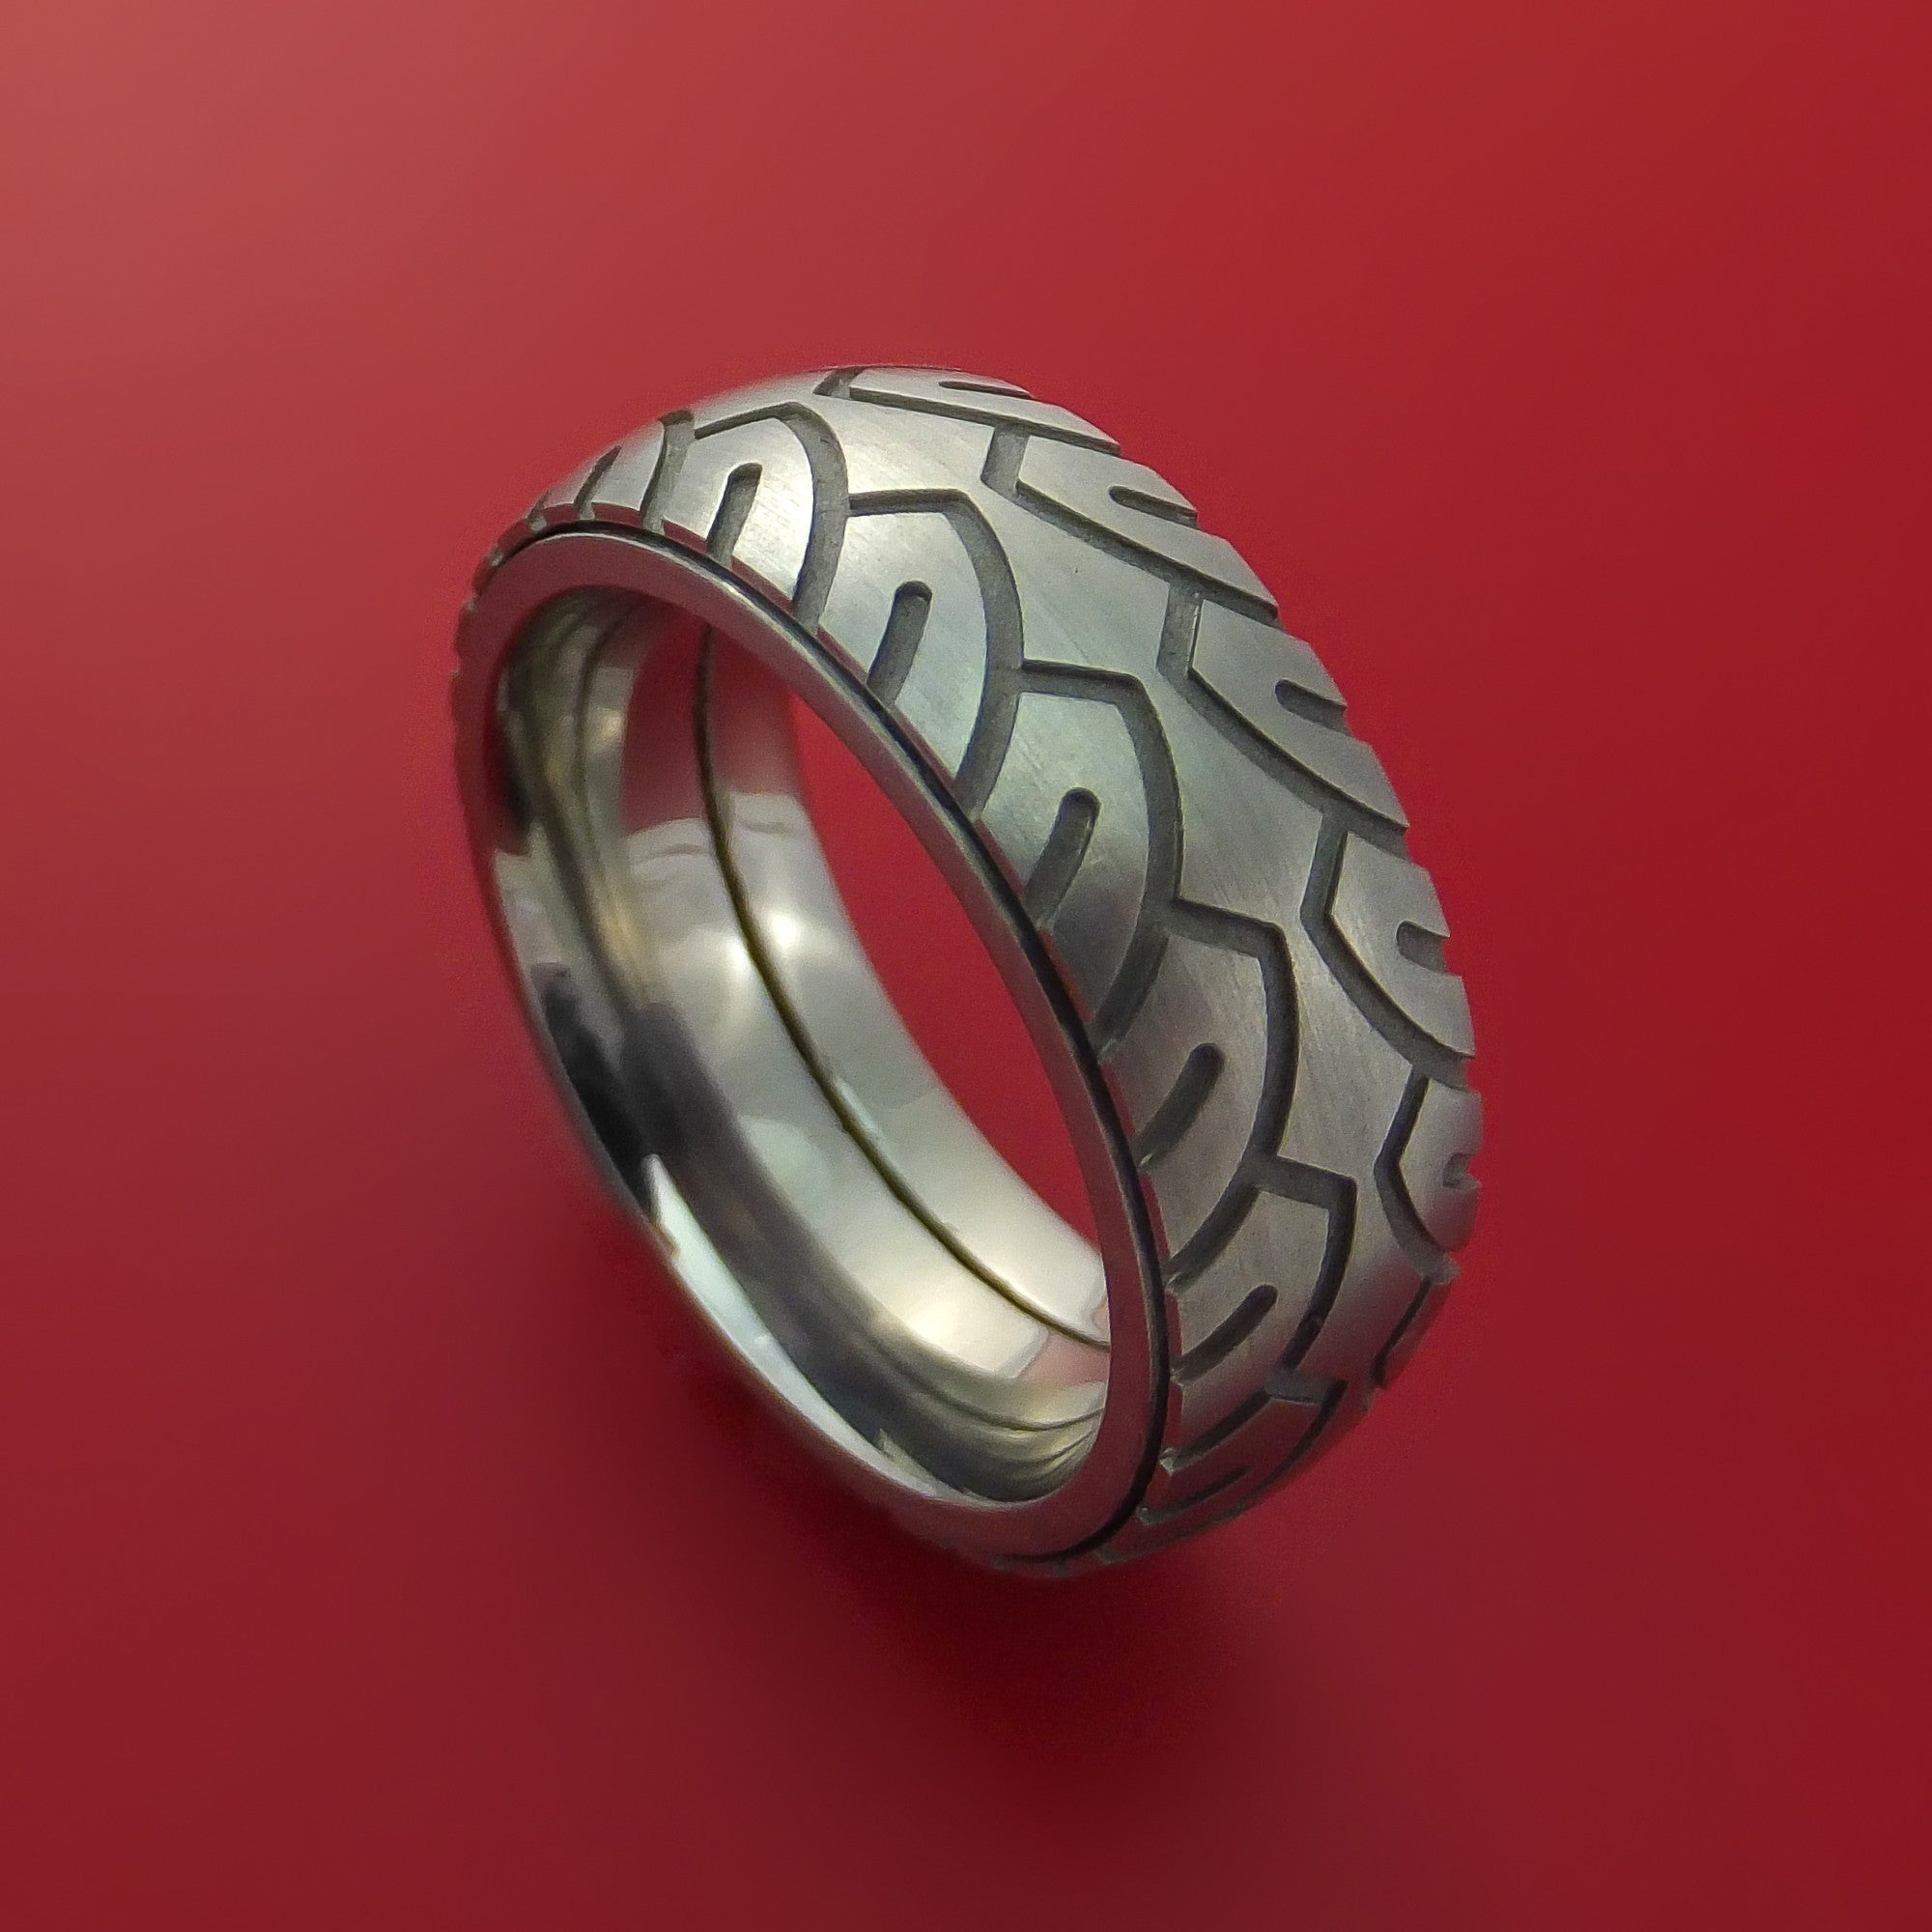 Buy Tire Tread Ring Online In India - Etsy India